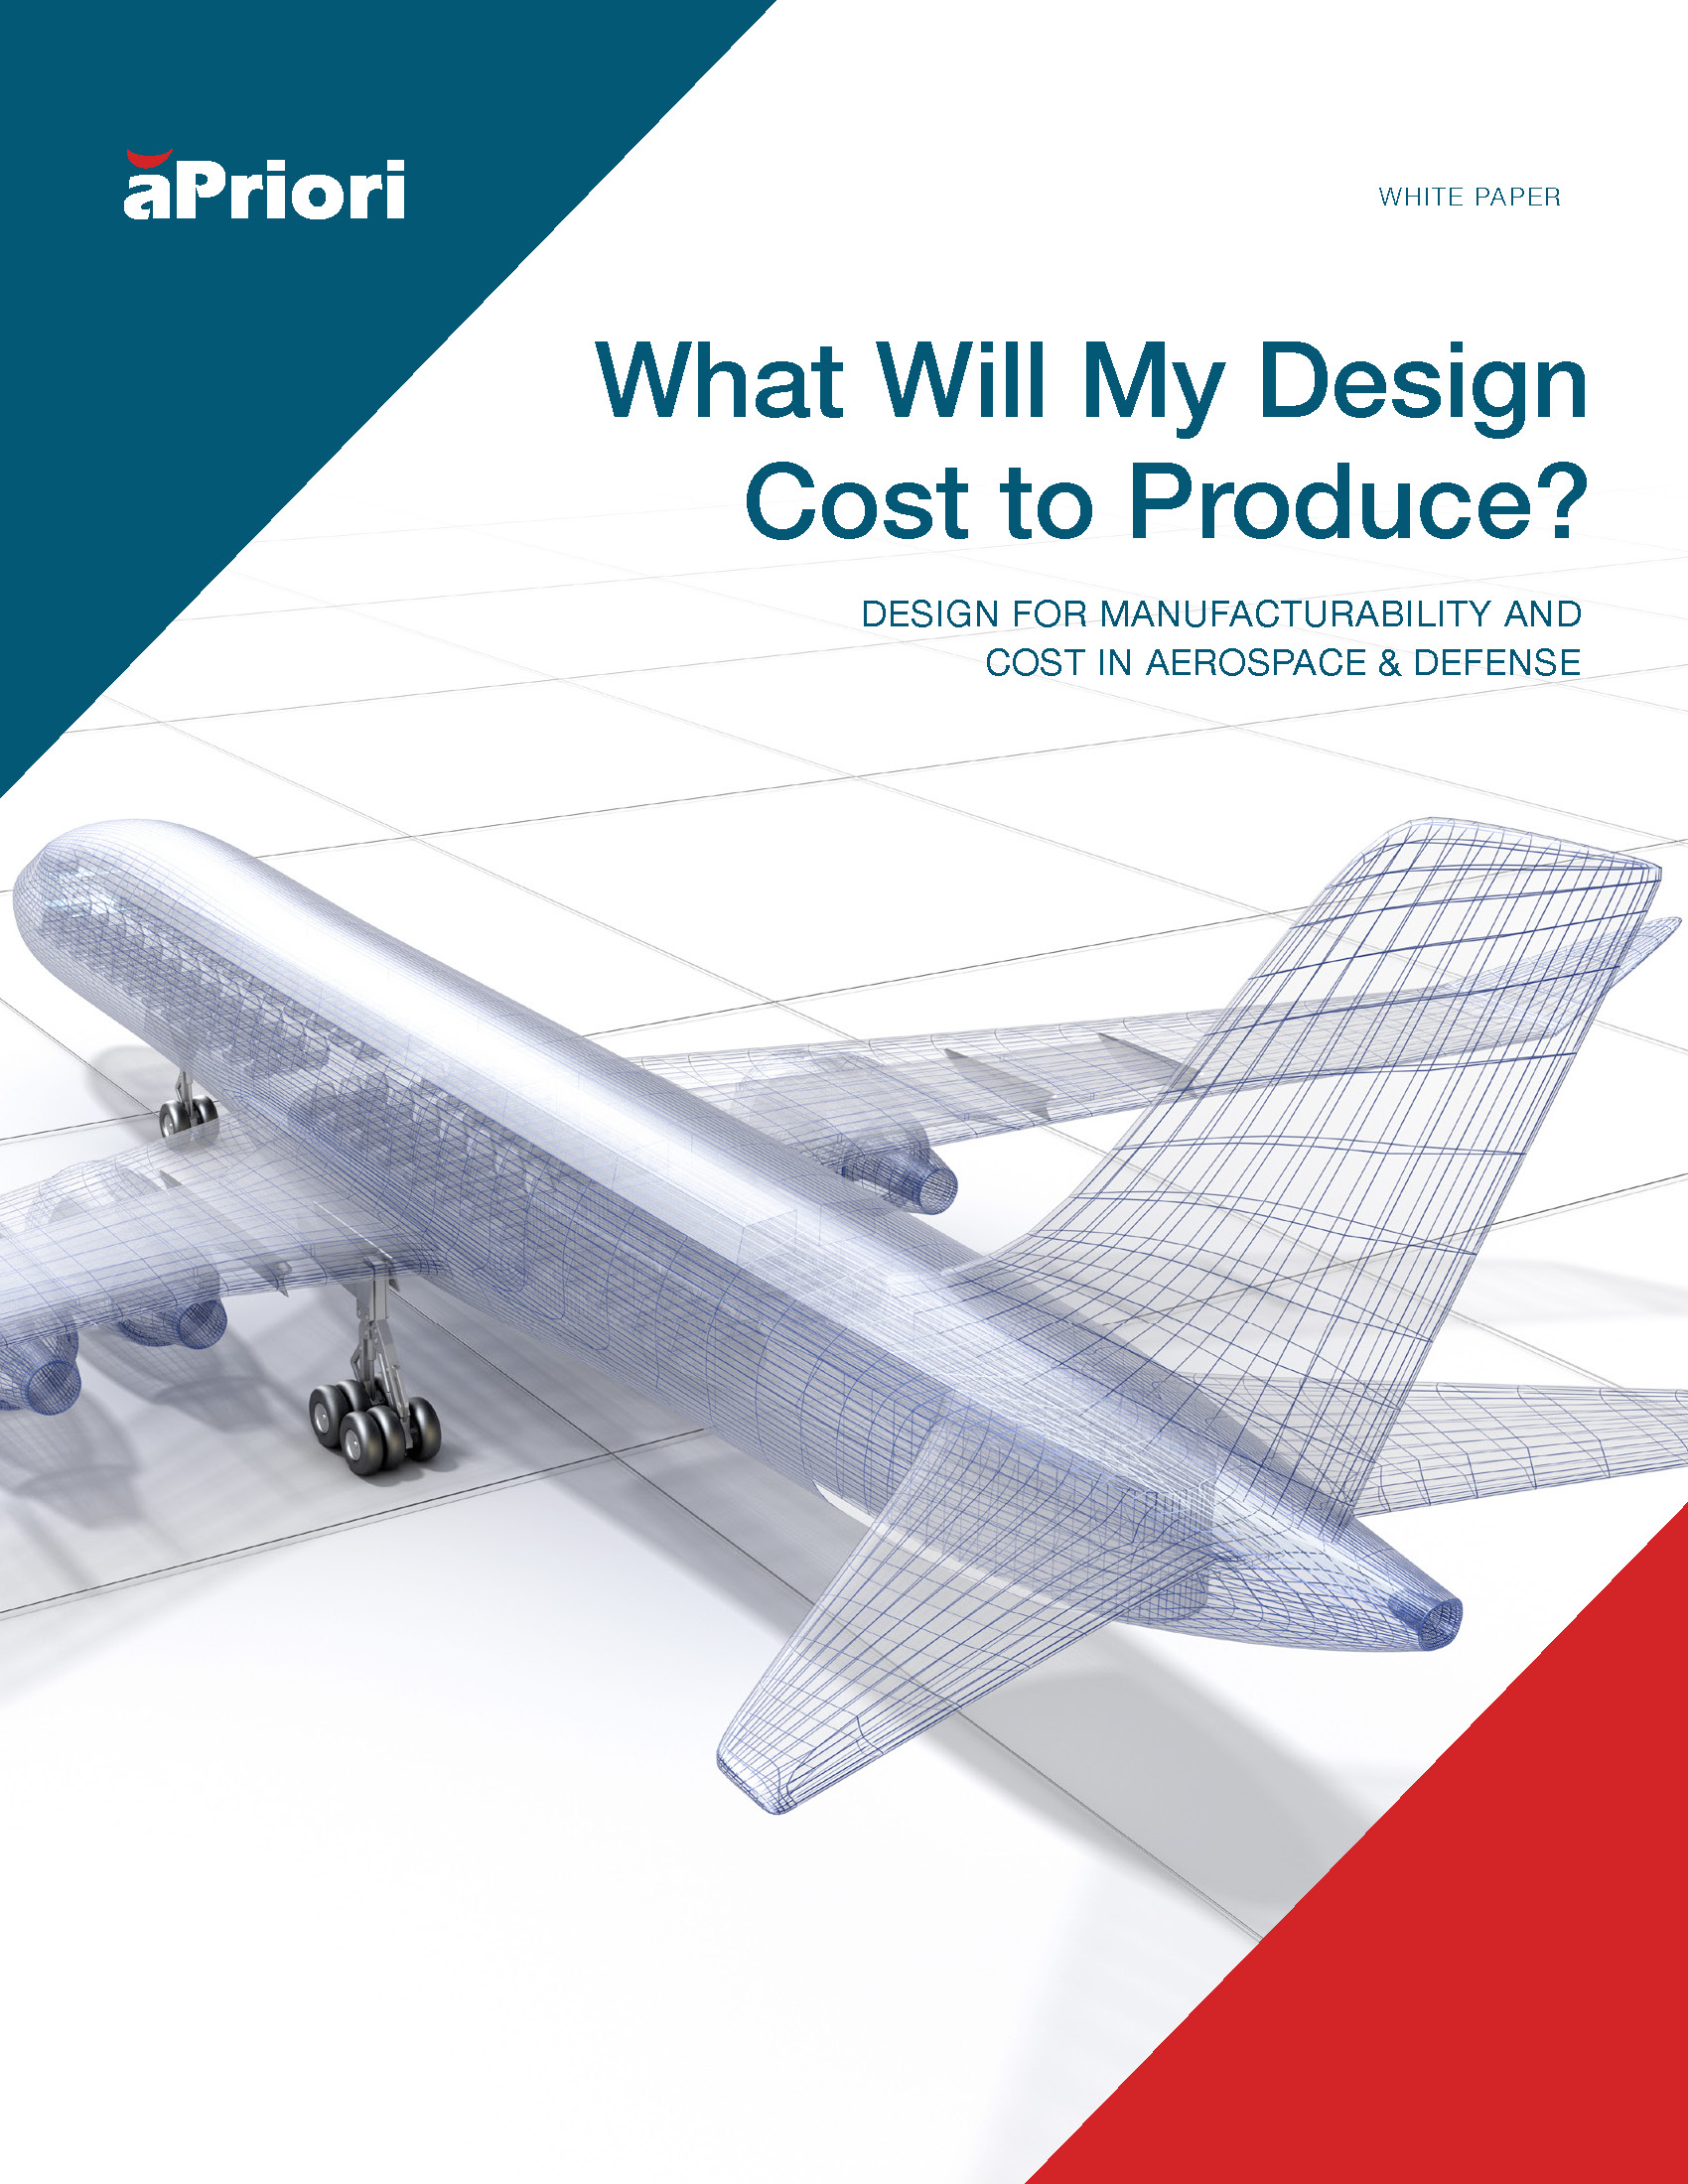 What Will My Aerospace & Defense Design Cost to Produce